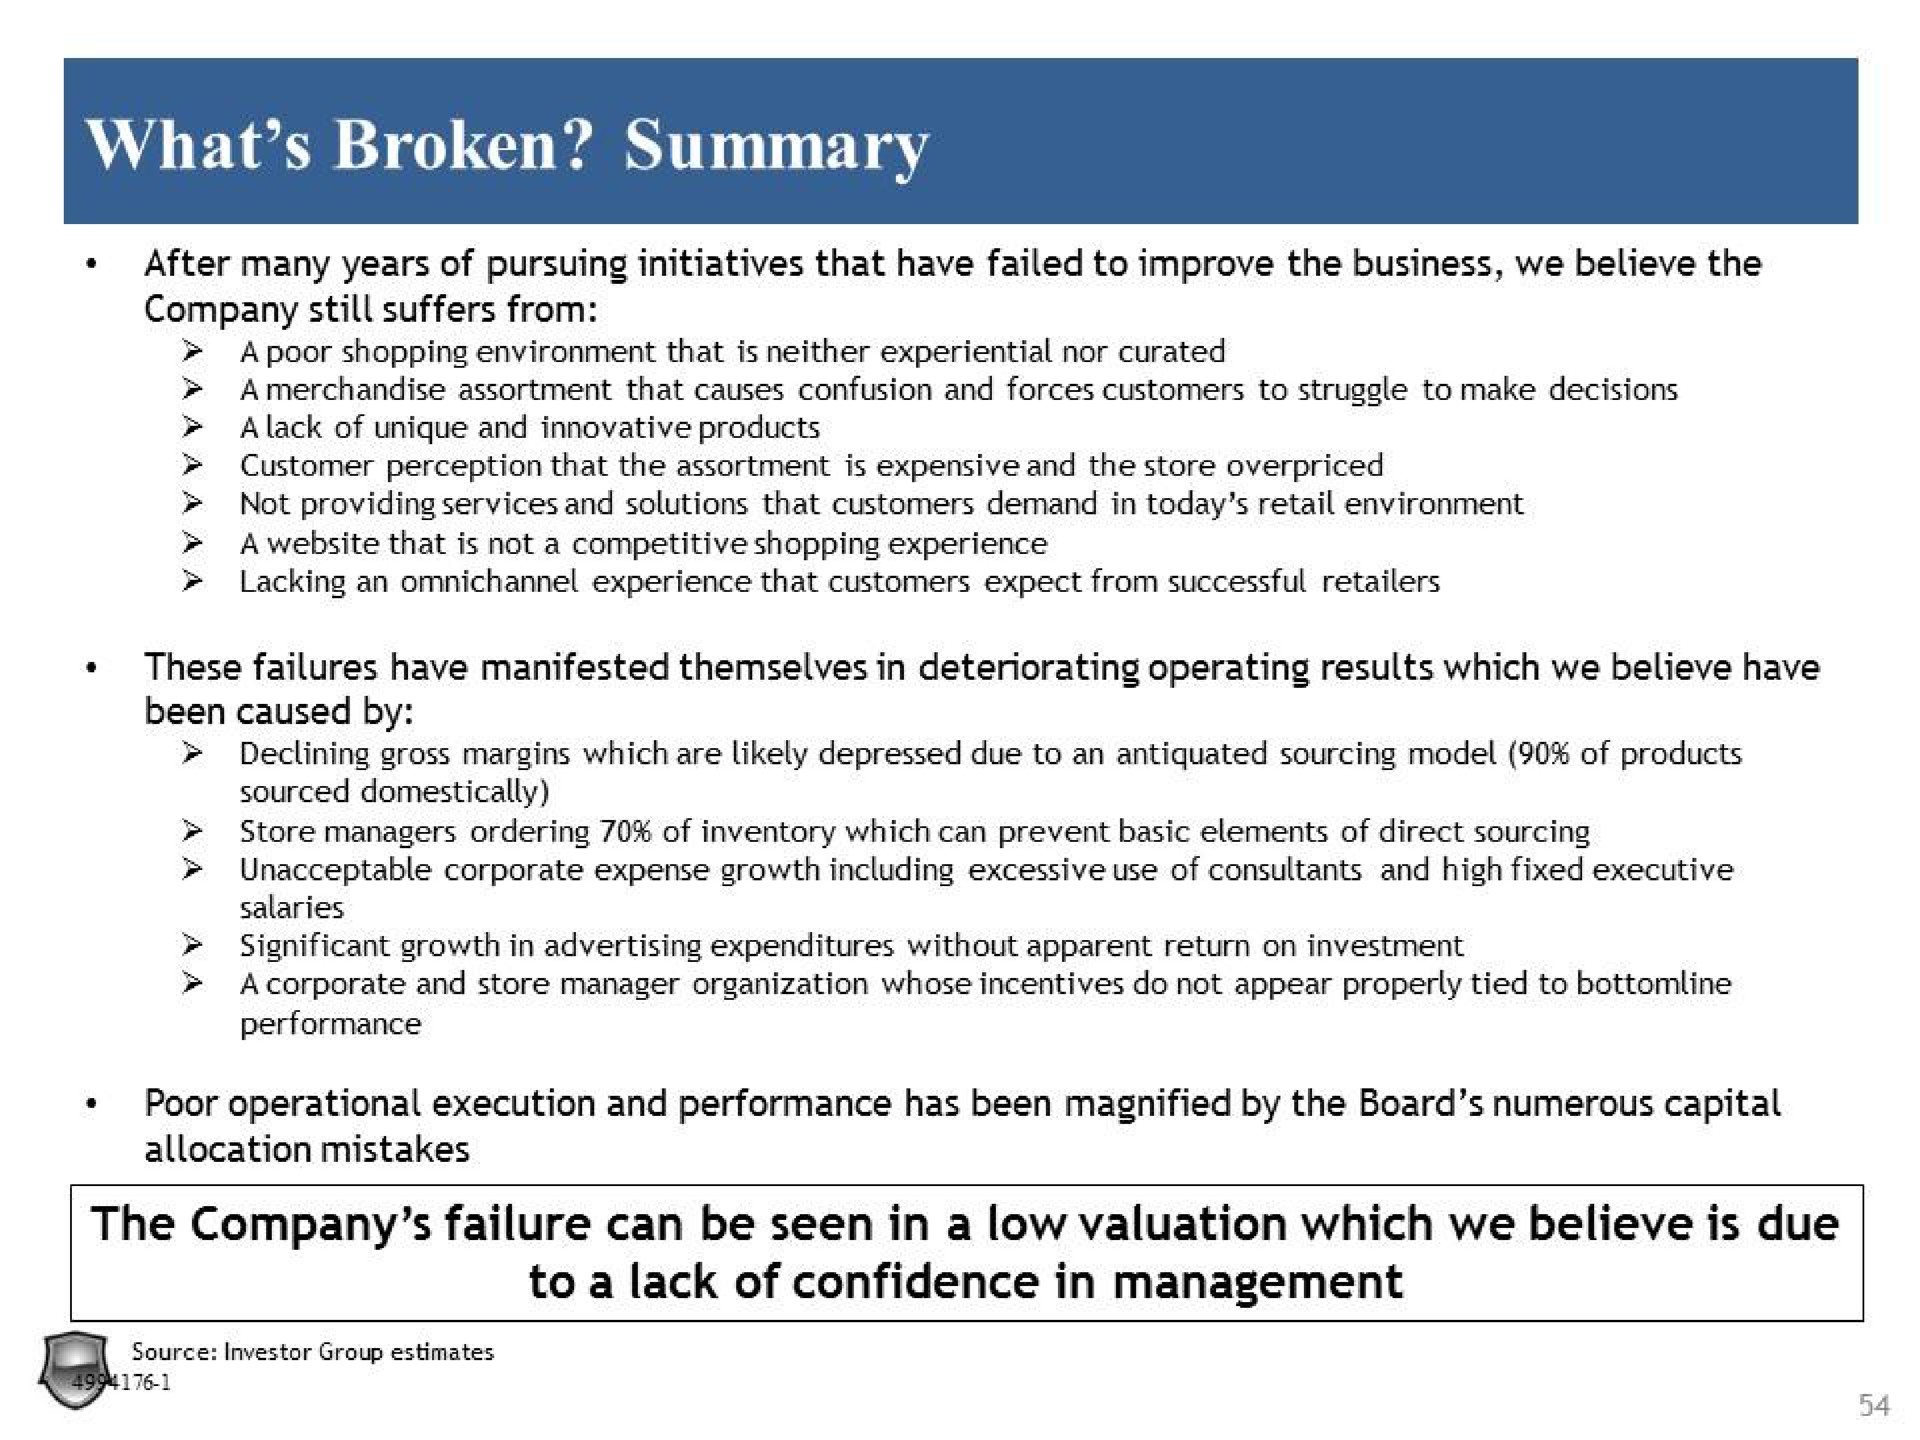 what broken summary the company failure can be seen in a low valuation which we believe is due to a lack of confidence in management | Legion Partners